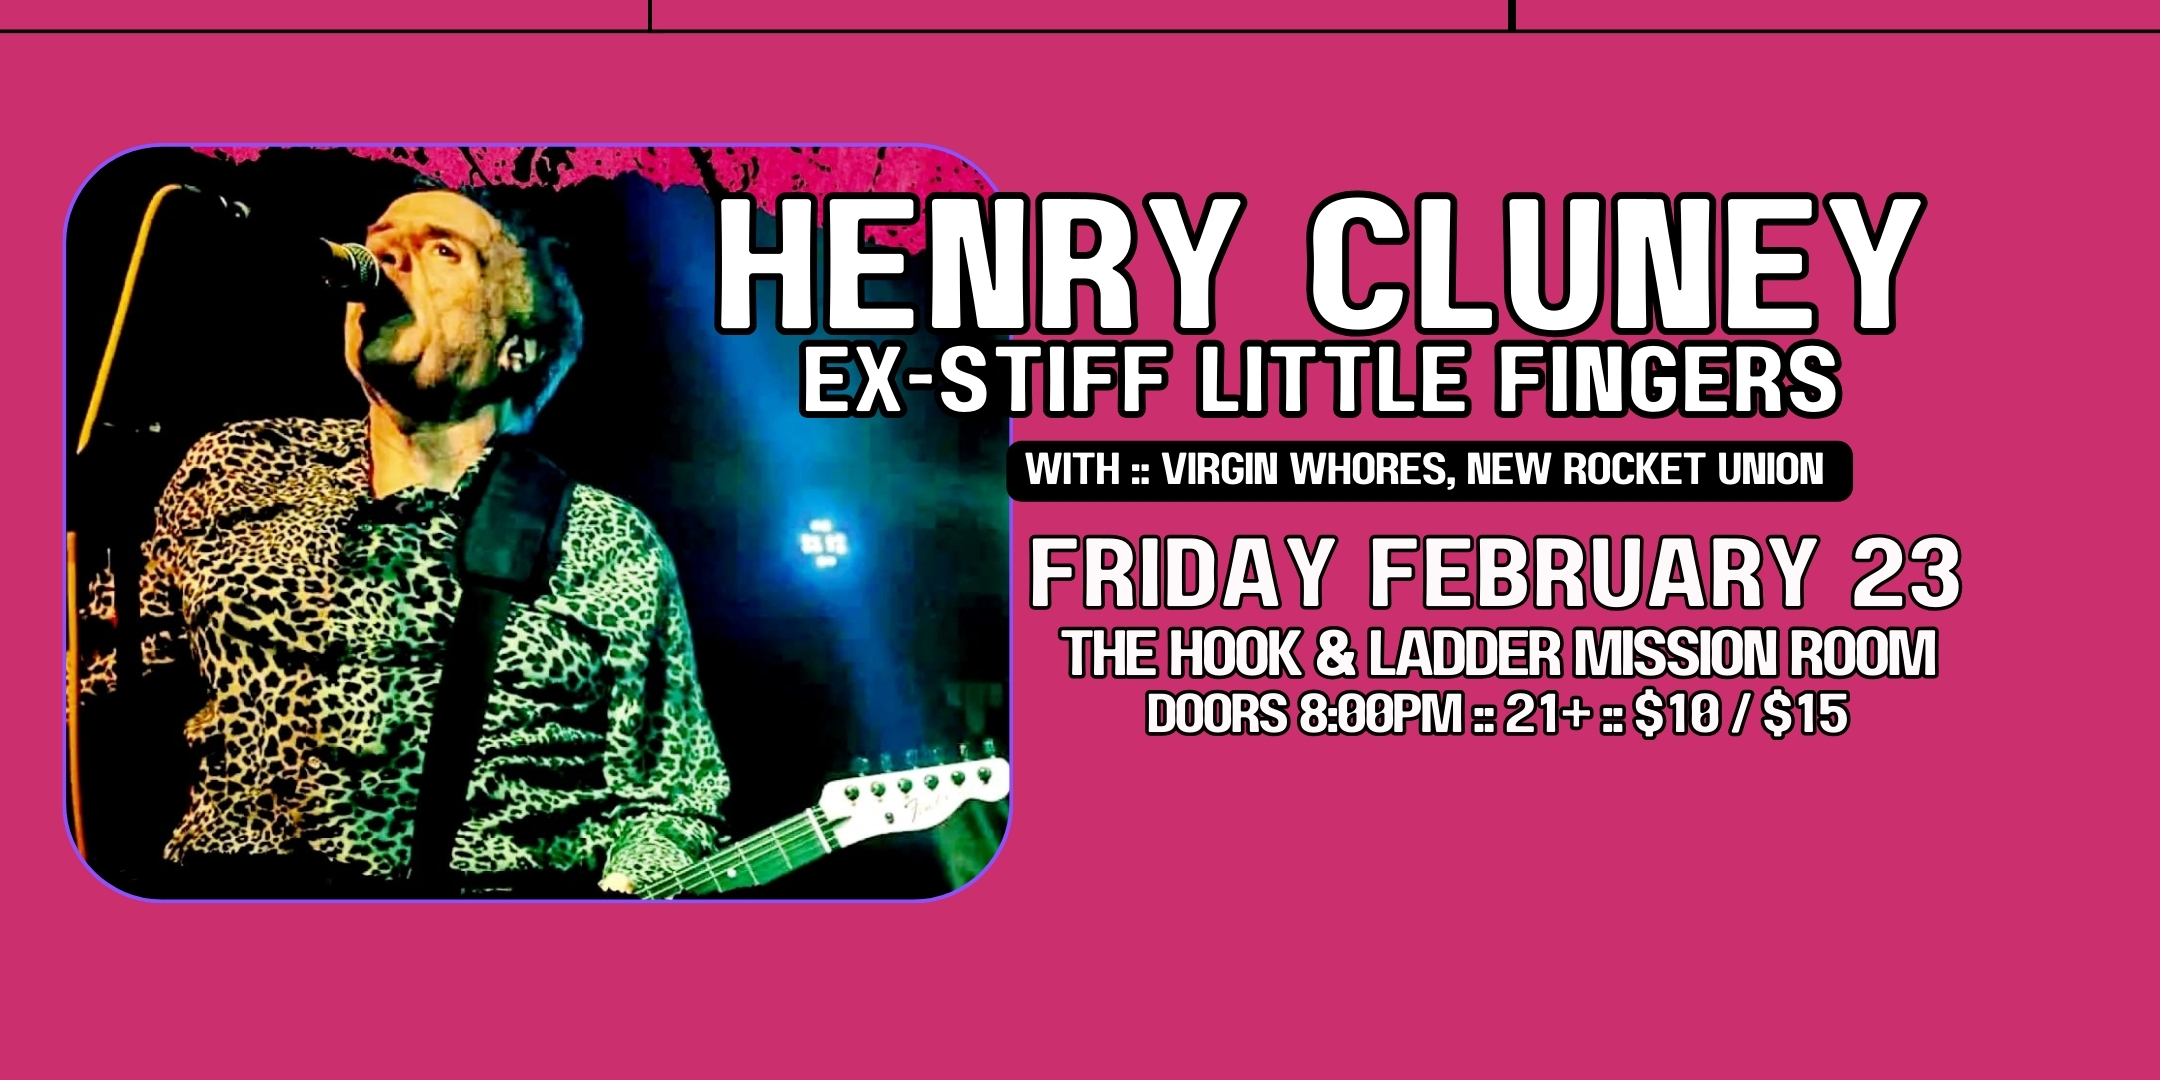 Henry Cluney (ex-Stiff Little Fingers) with Virgin Whores, & New Rocket Union Friday, February 23 The Hook and Ladder Mission Room Doors 8:00pm :: Music 8:30pm :: 21+ General Admission: $10 ADV / $15 DOS